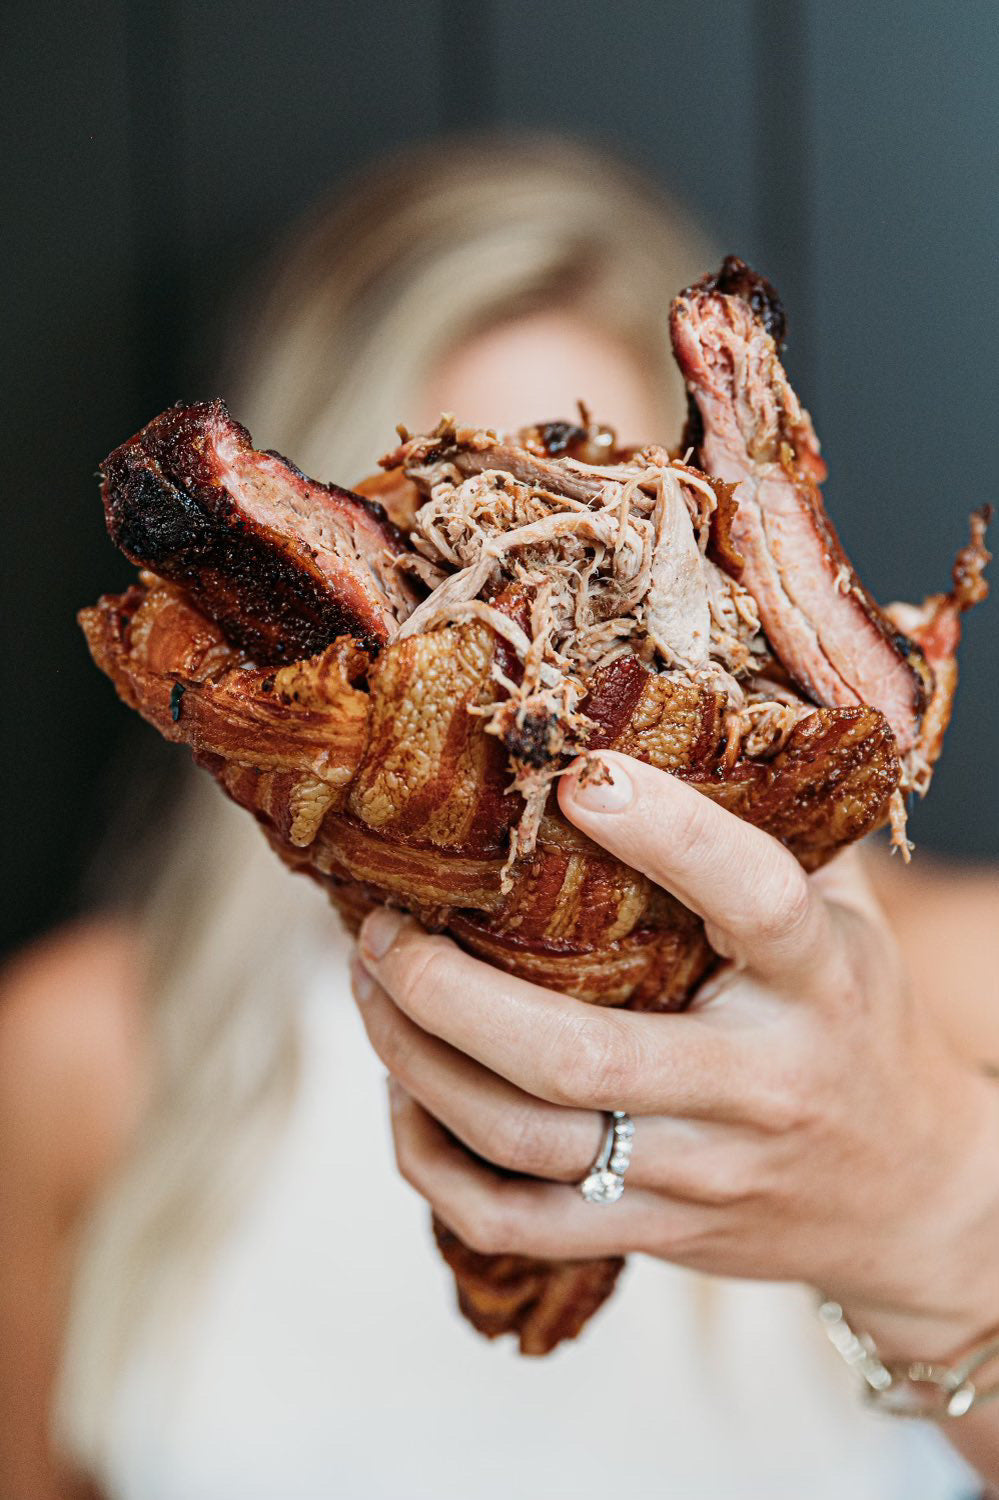 Apple Chipotle Smoked Pulled Pork bacon Cup